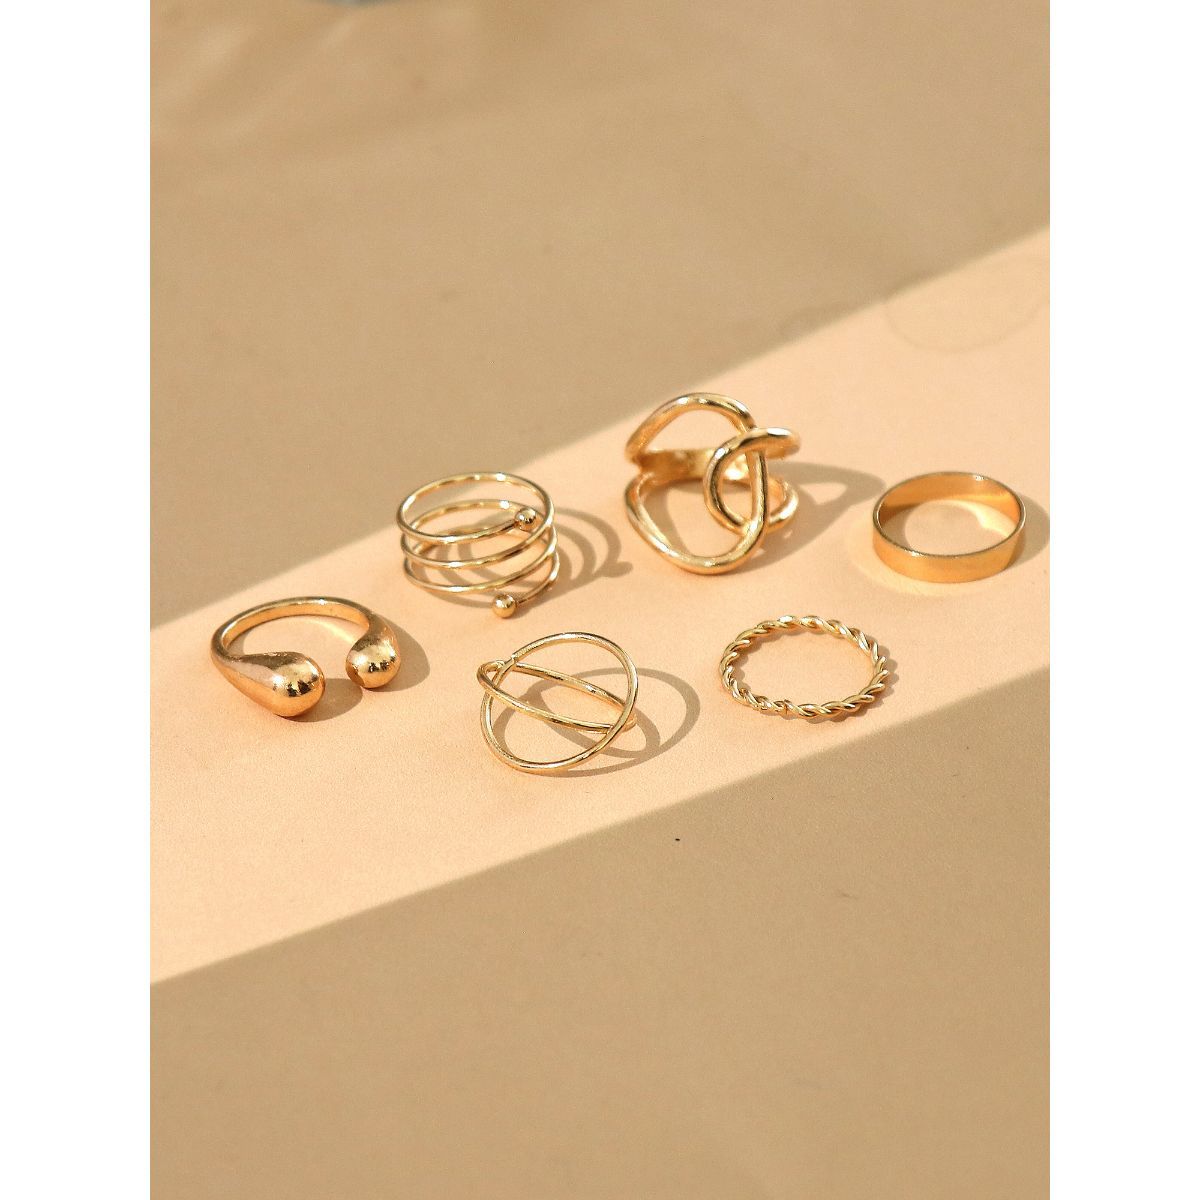 Gold Contemporary Abstract Ring Set of 6